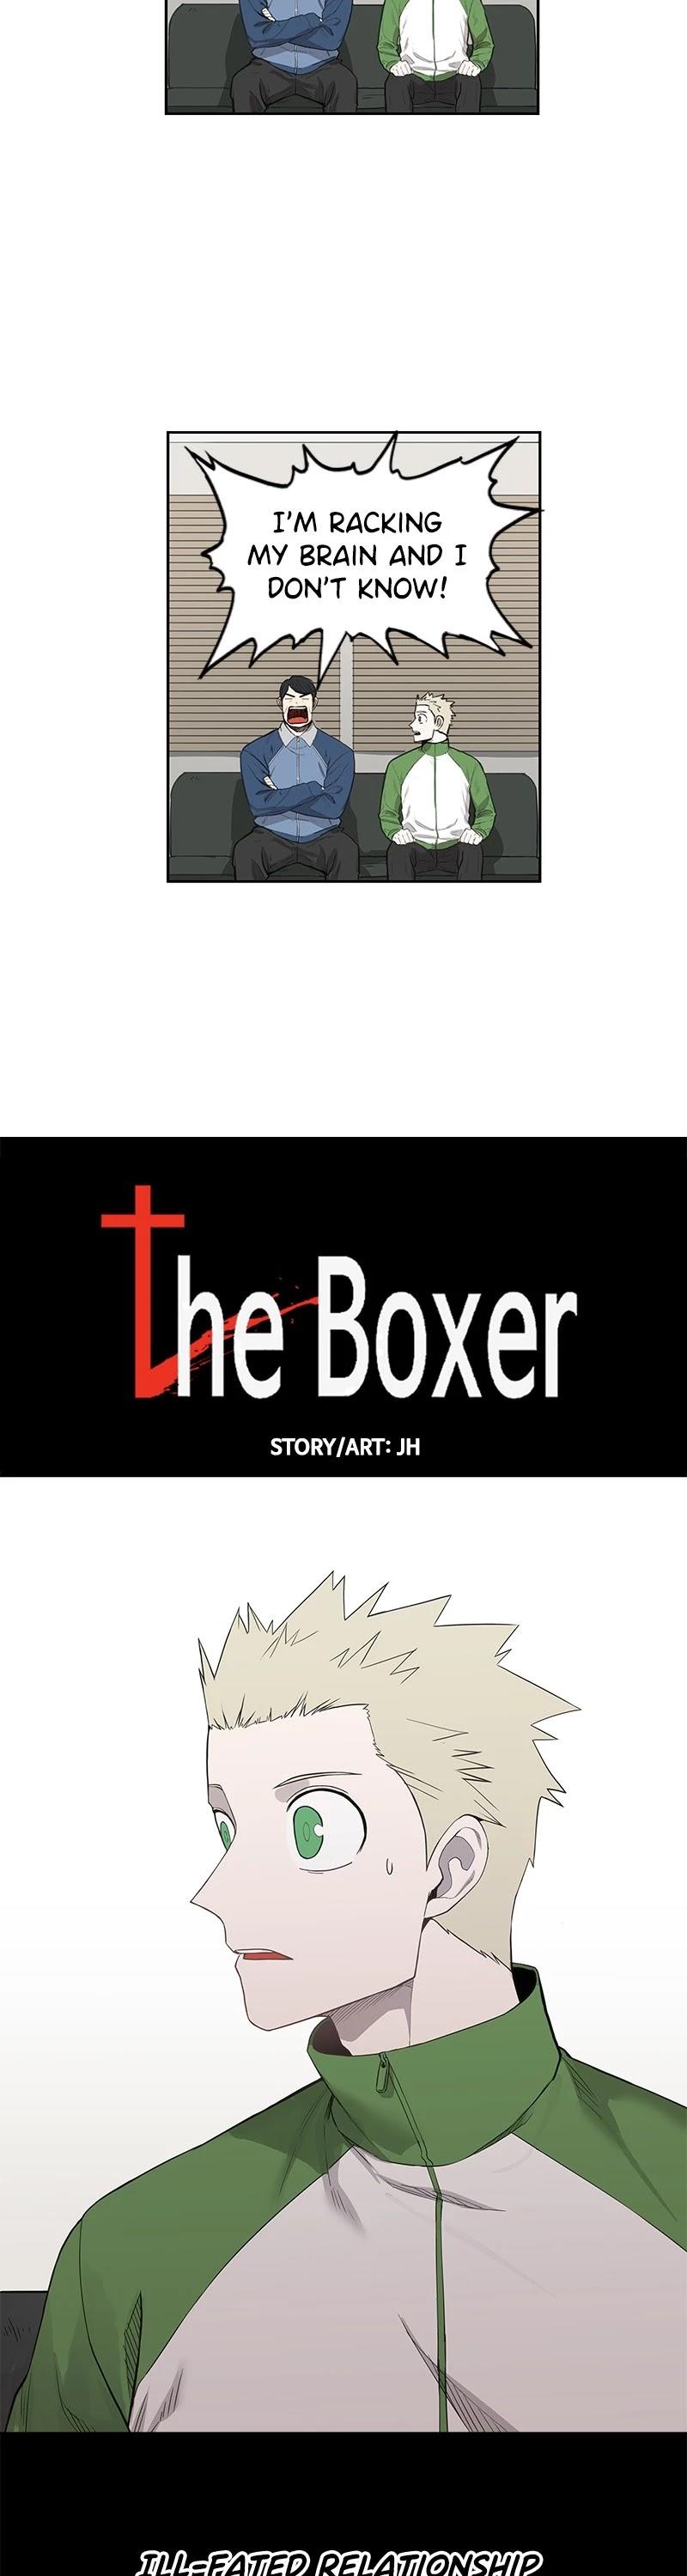 The Boxer Chapter 117: Ep. 107 - Ill-Fated Relationship (3) (Spin-Off #3) page 3 - 